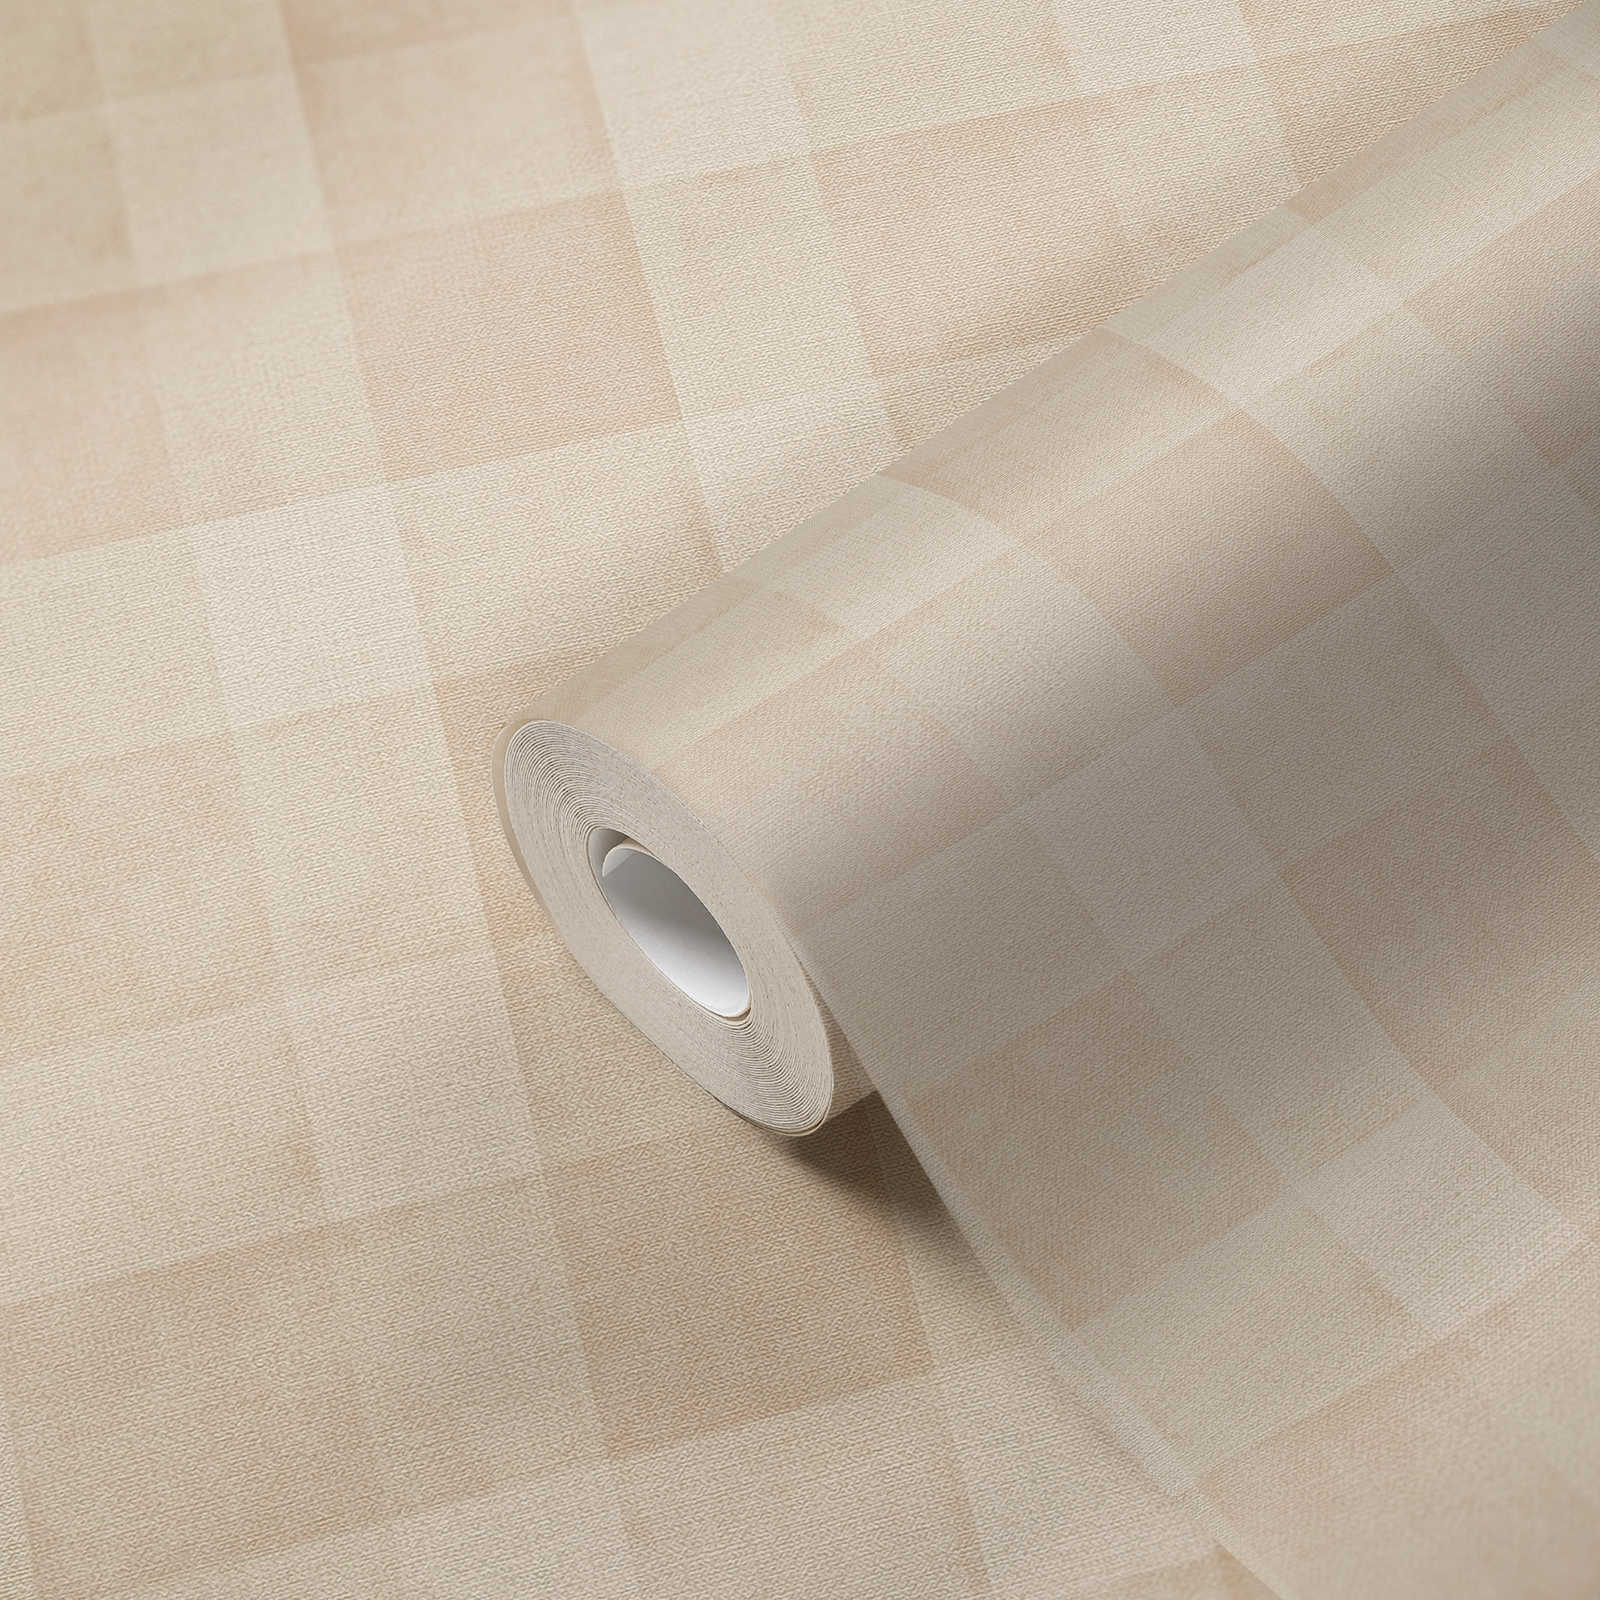             Non-woven wallpaper PVC-free check pattern with linen look - beige
        